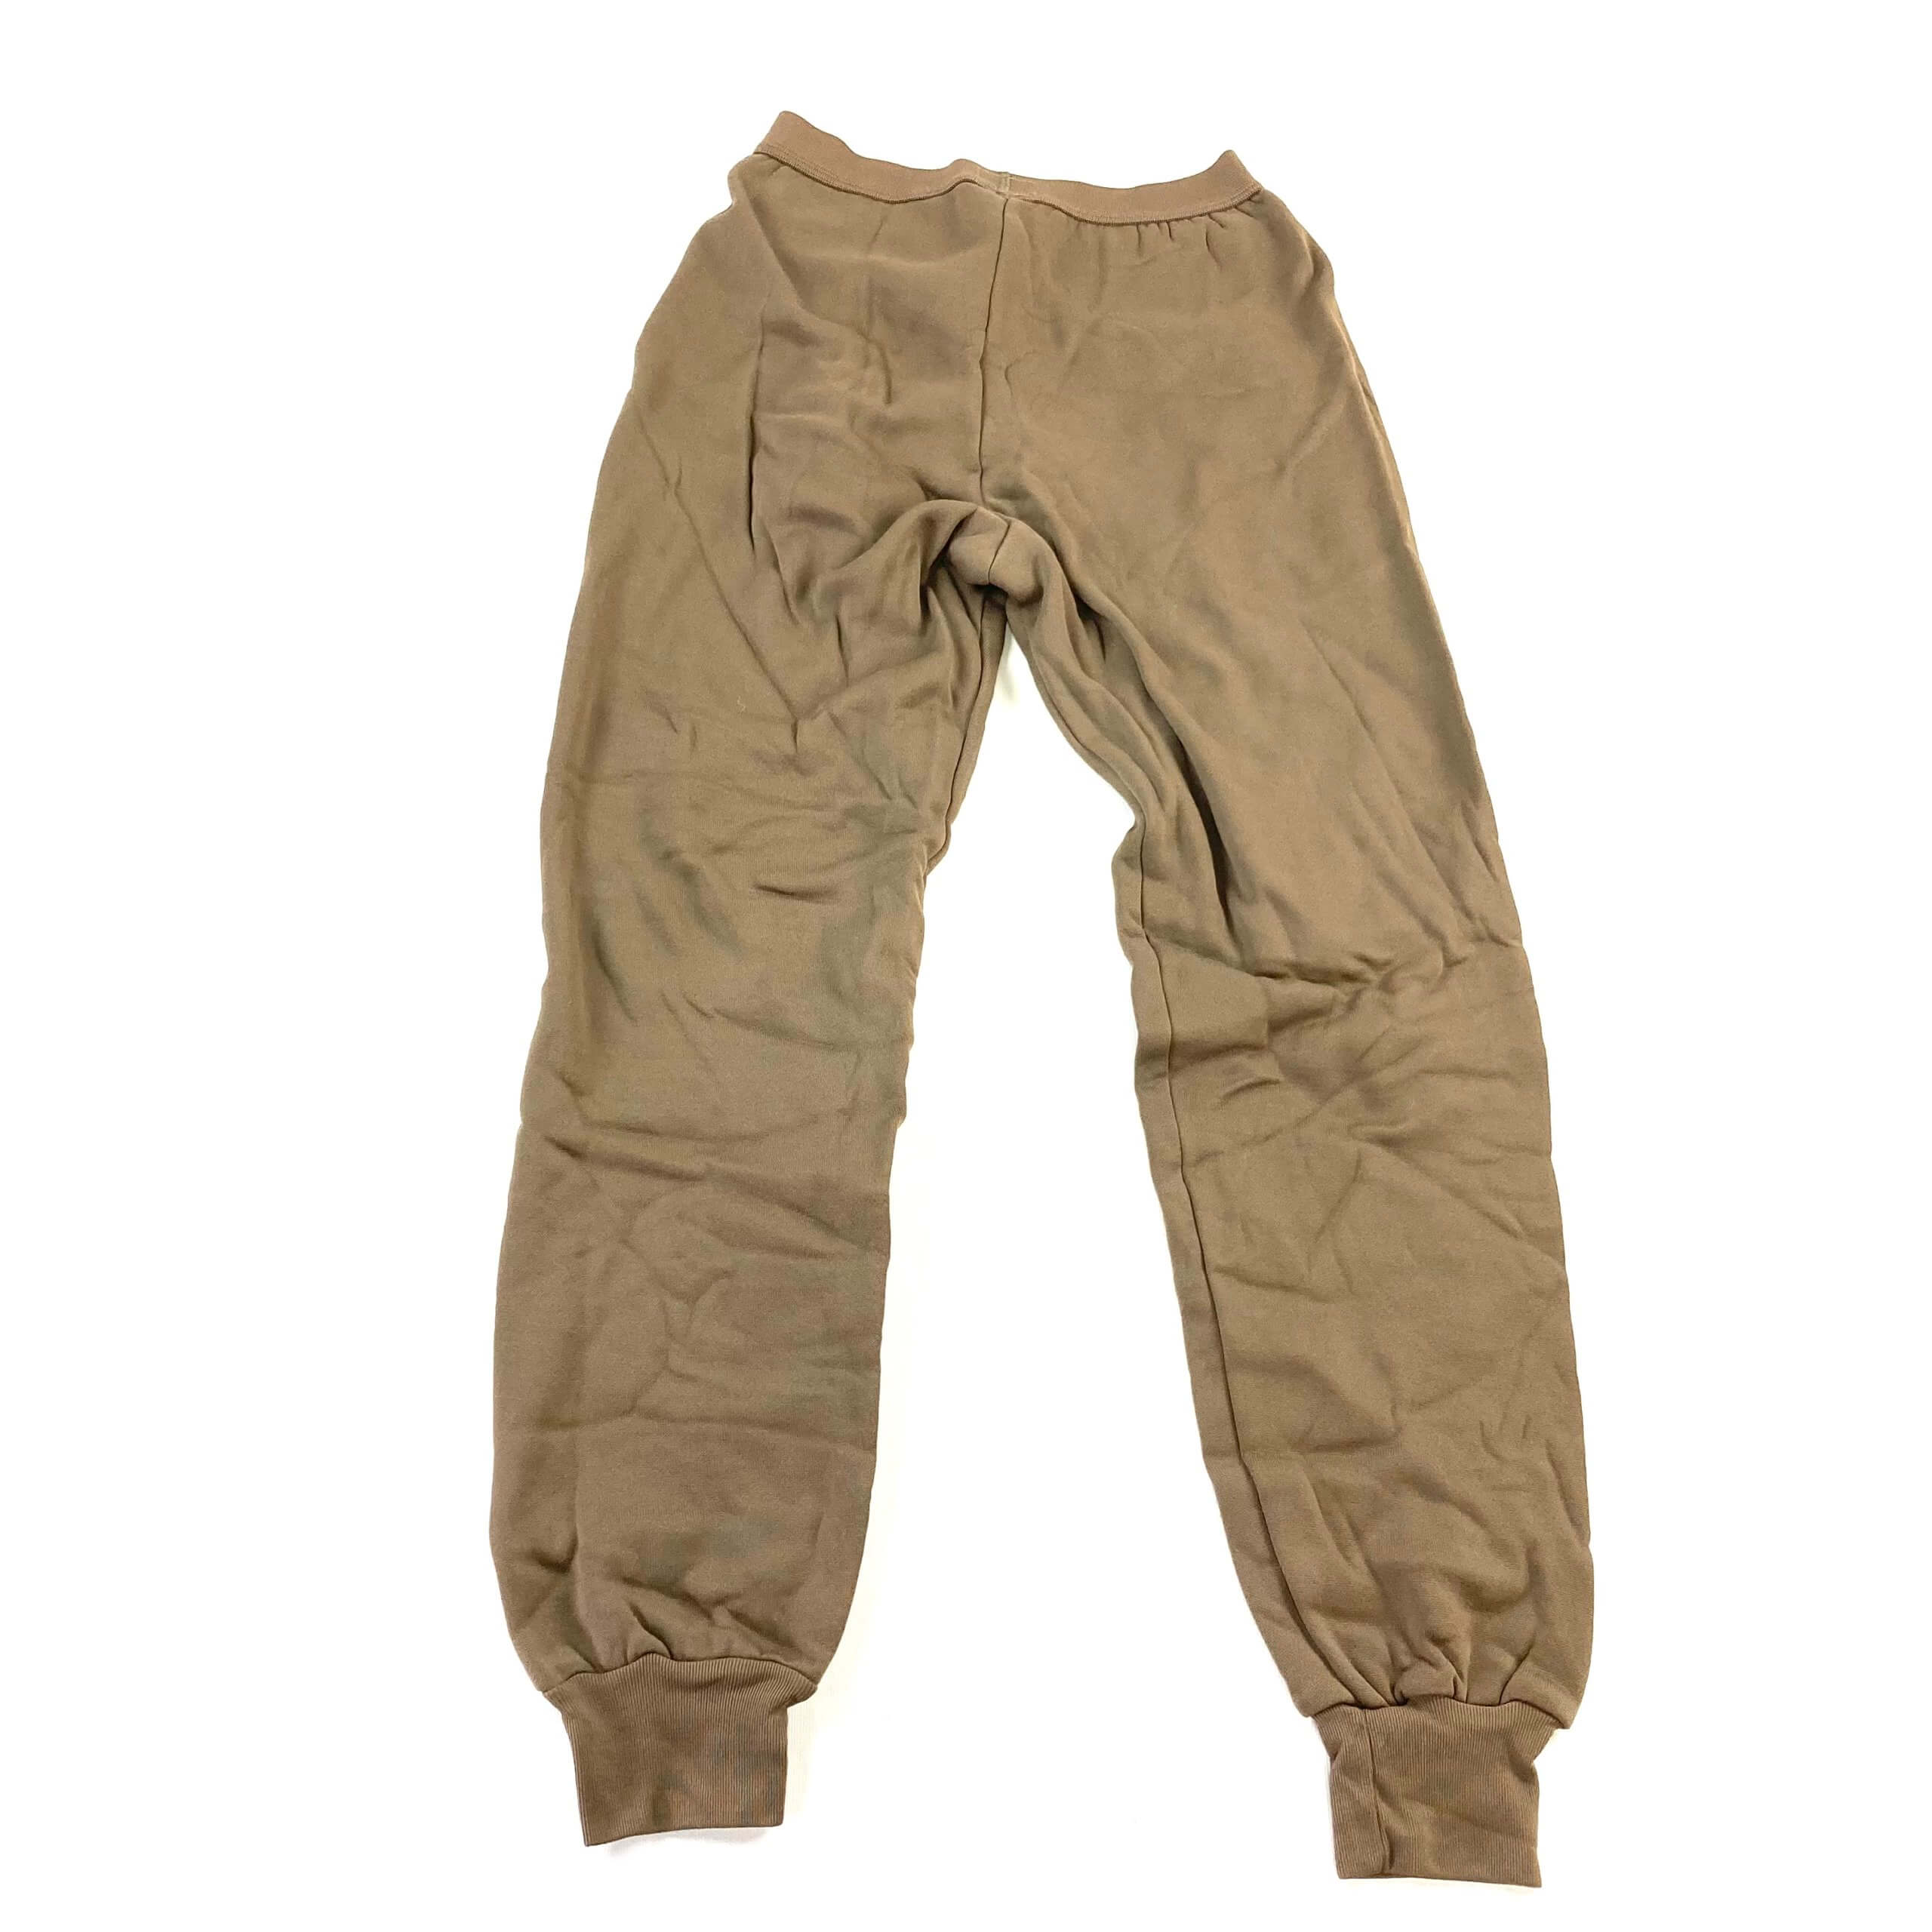 Details about   Polypro Sand Long Johns Drawers USGI Pants Heavy Winter Weight Used 